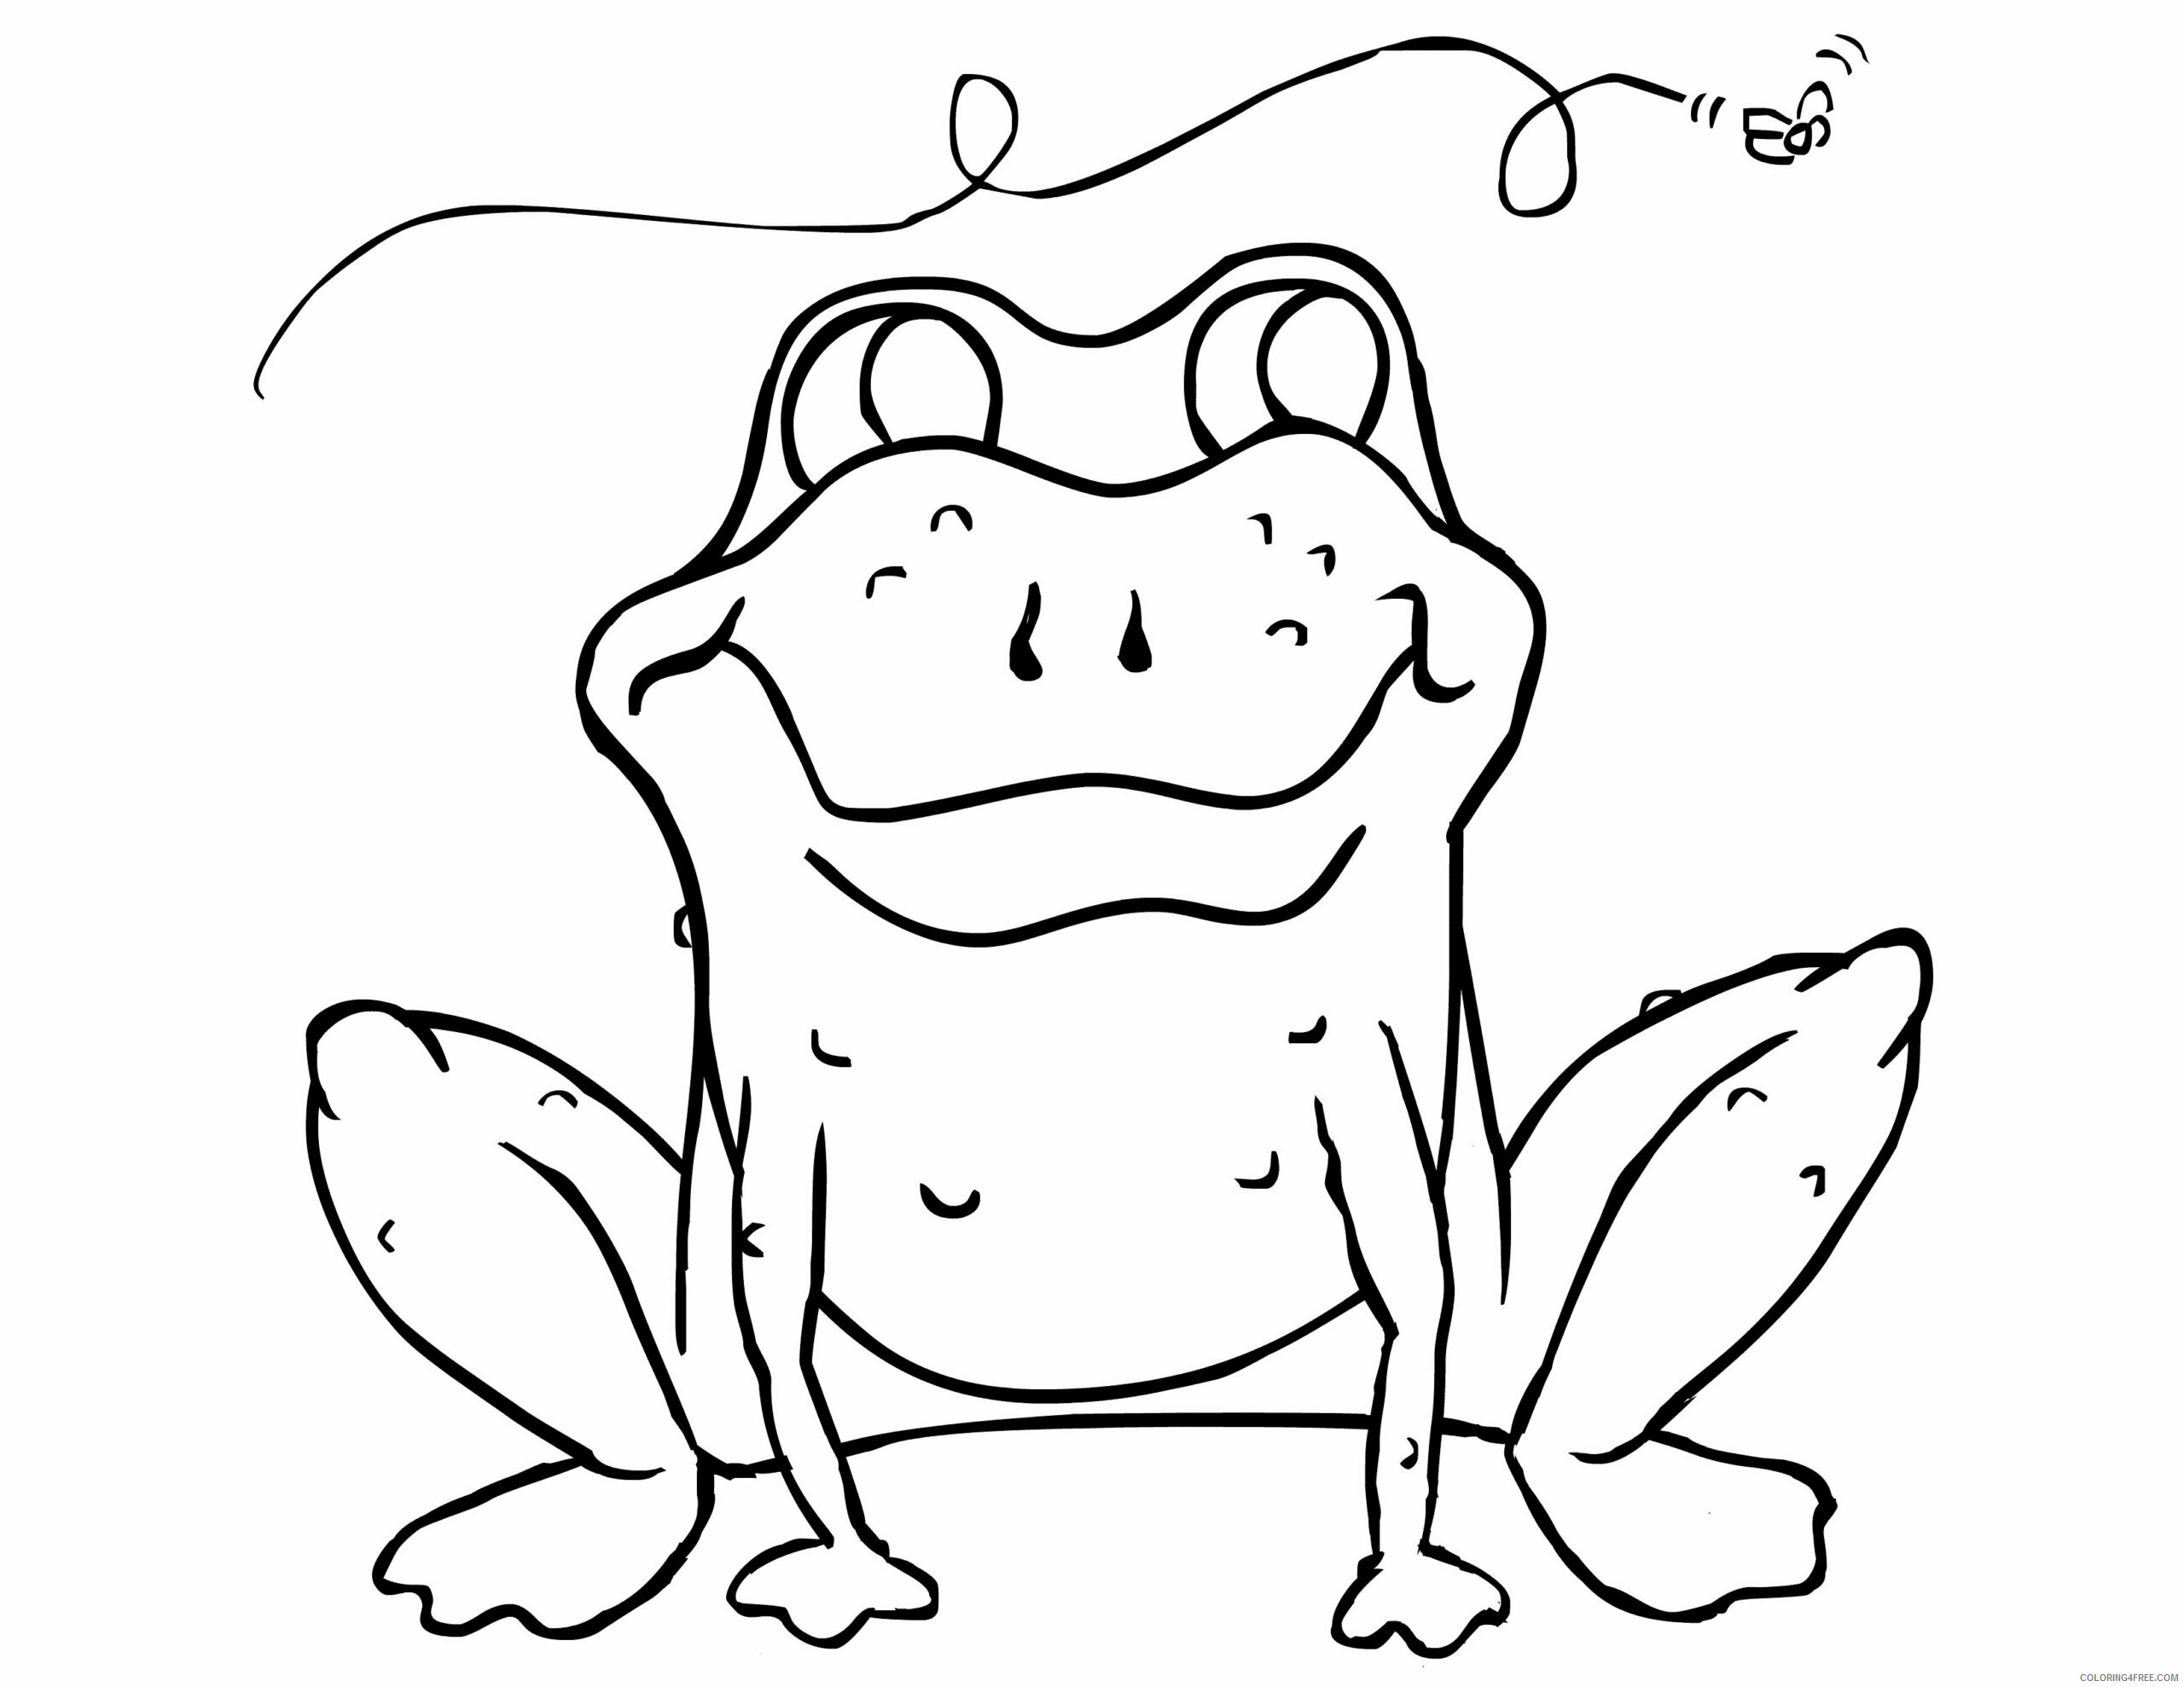 Frog Coloring Pages Animal Printable Sheets Crazy Frog 2021 2272 Coloring4free